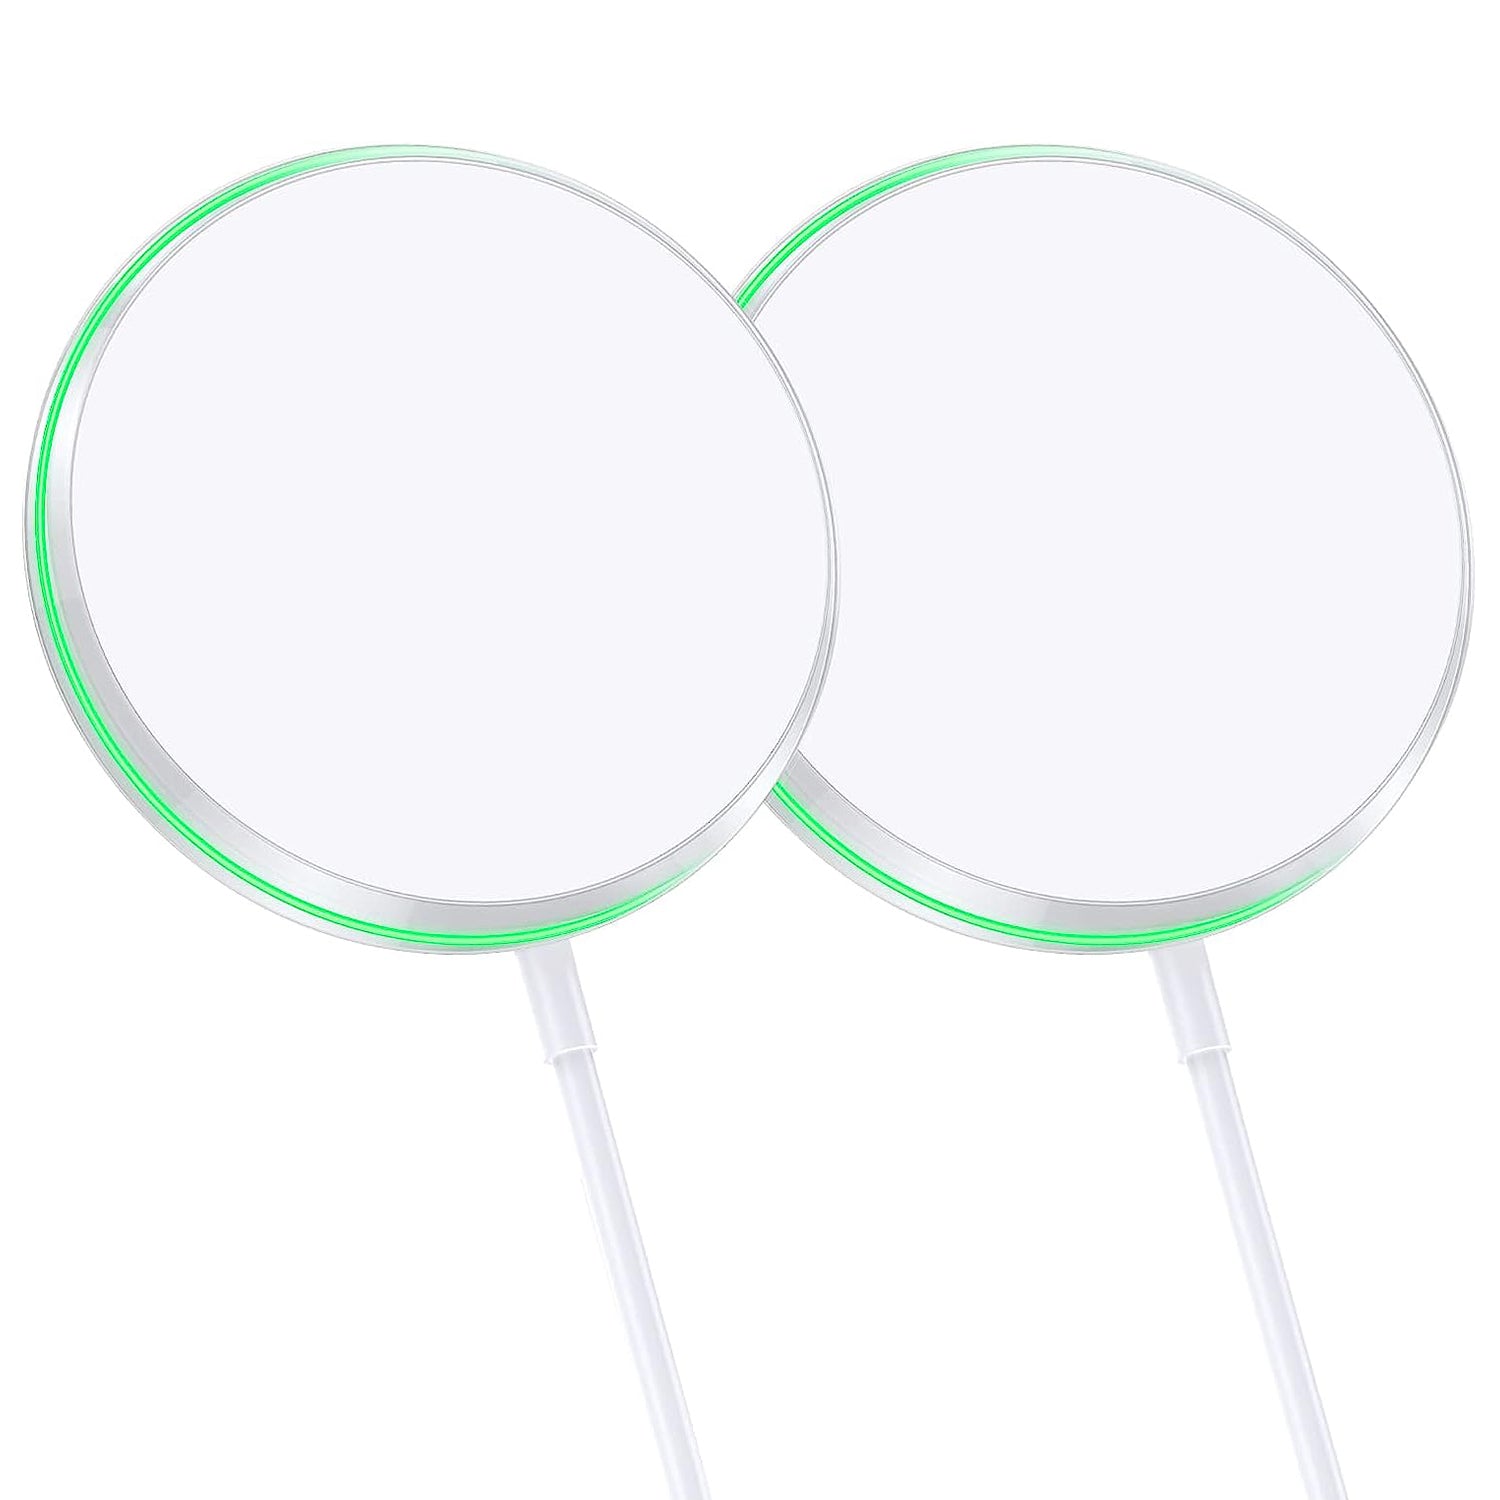 2 Pack Magnetic Wireless Charging Pads 15W Each with LED Indicator